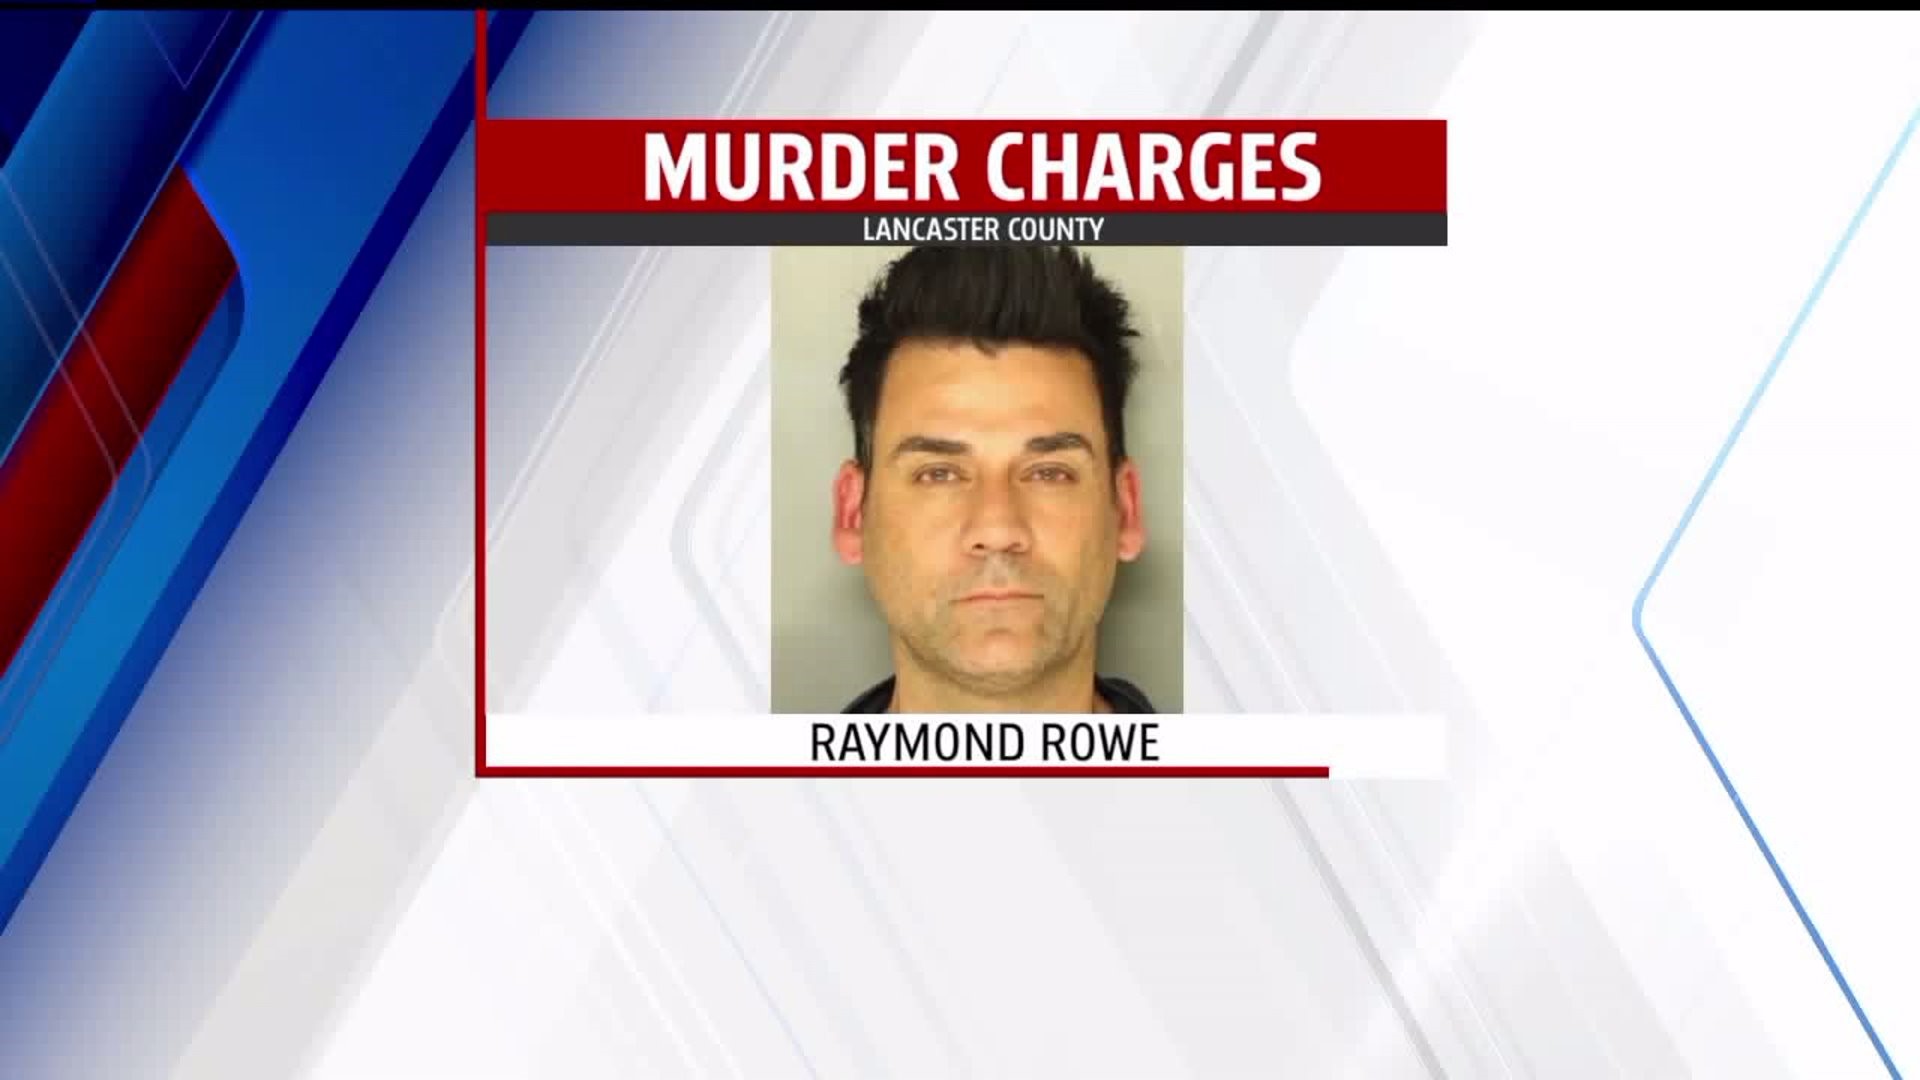 Raymond Rowe Appears in Court Today